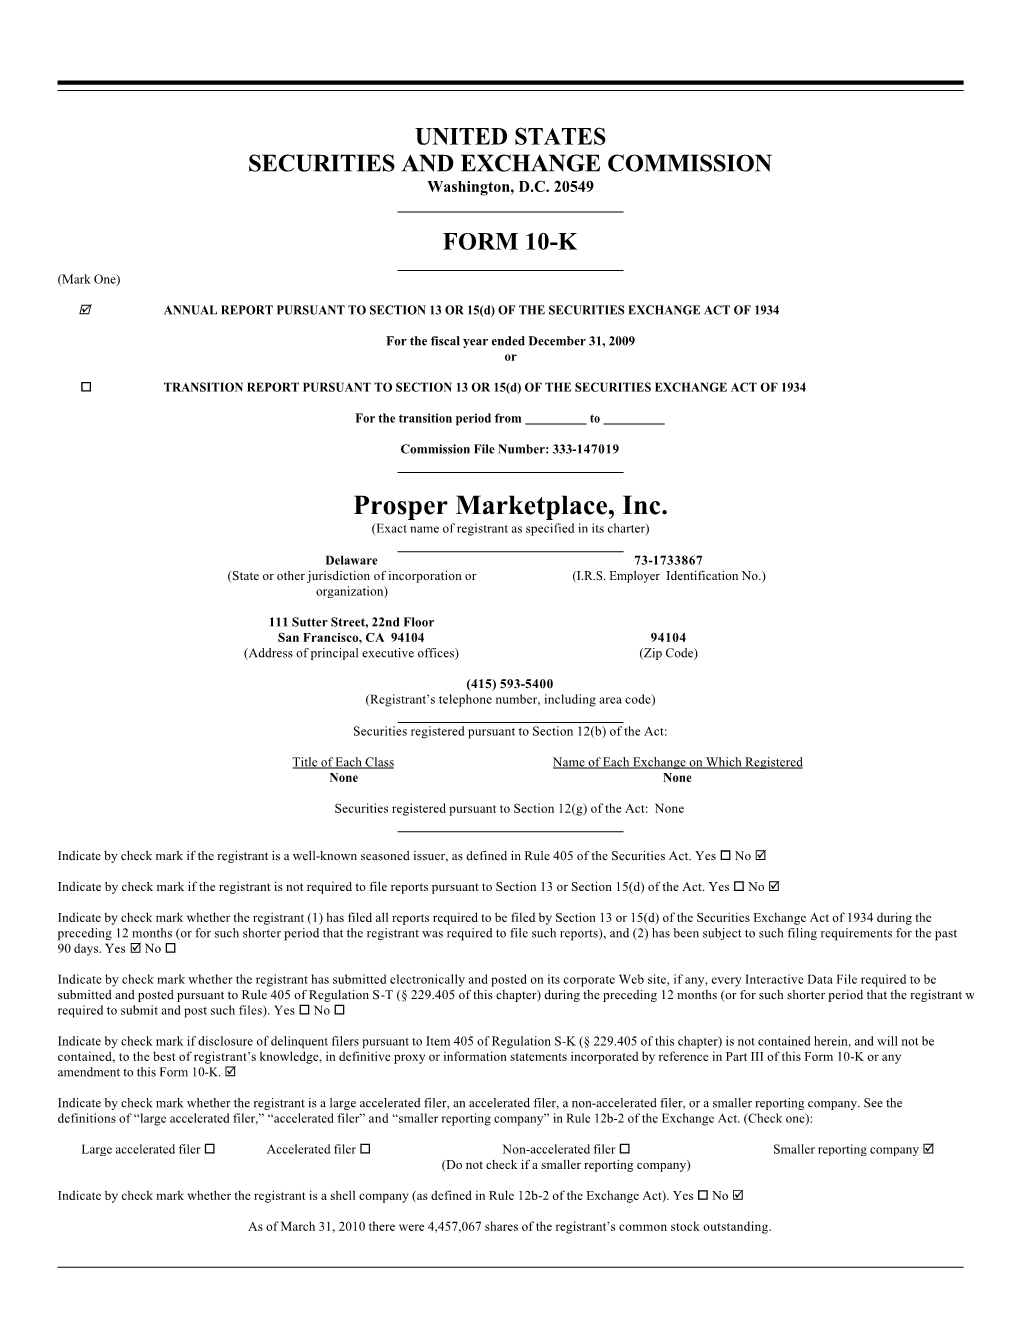 Prosper Marketplace, Inc. (Exact Name of Registrant As Specified in Its Charter)